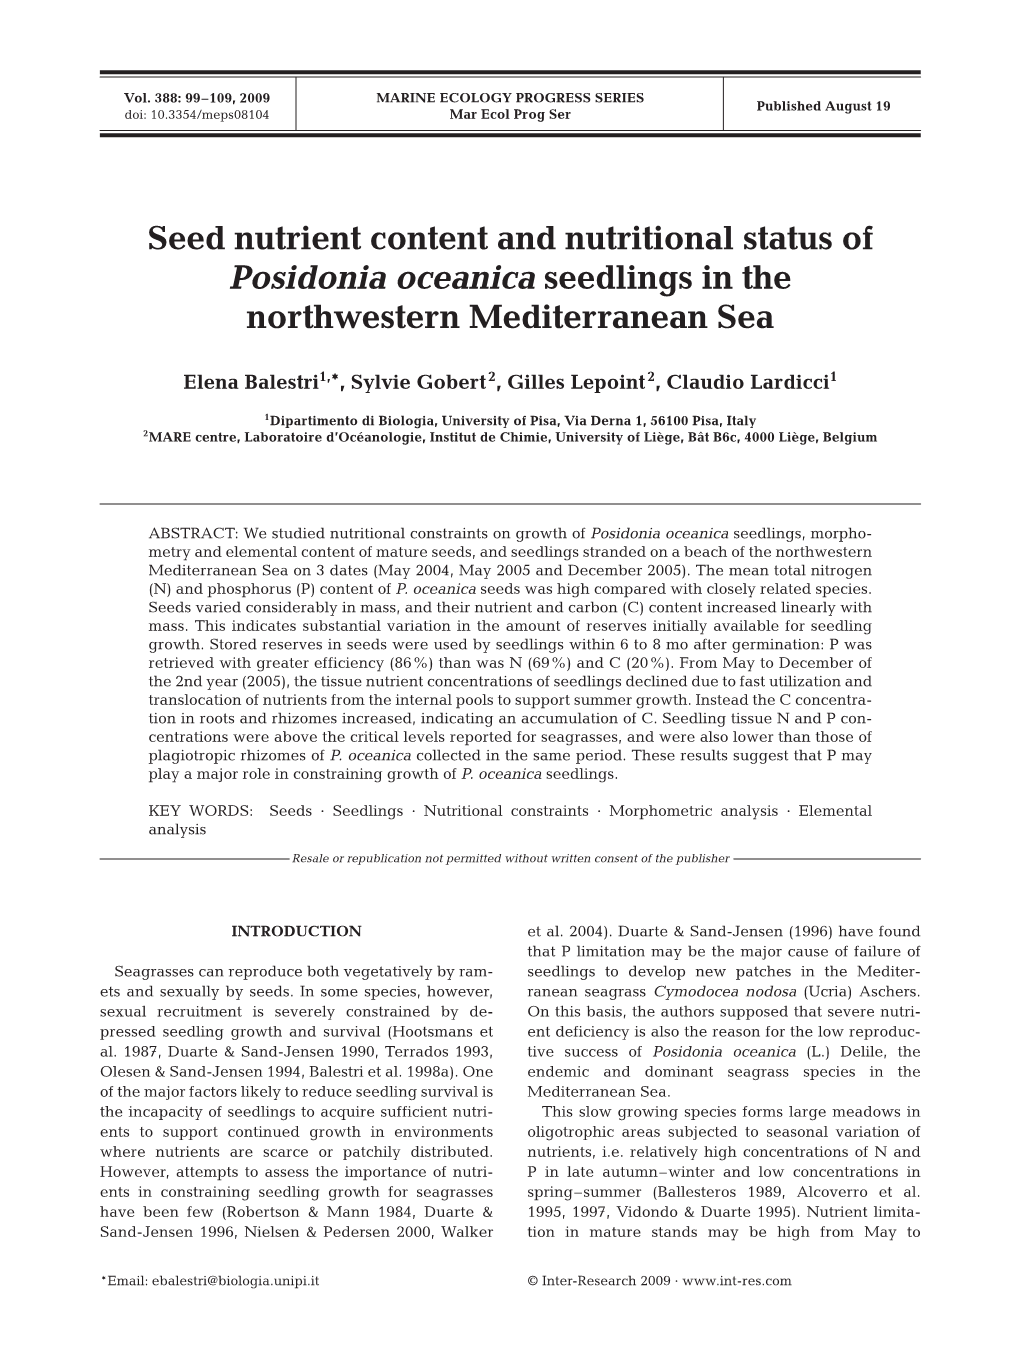 Seed Nutrient Content and Nutritional Status of Posidonia Oceanica Seedlings in the Northwestern Mediterranean Sea